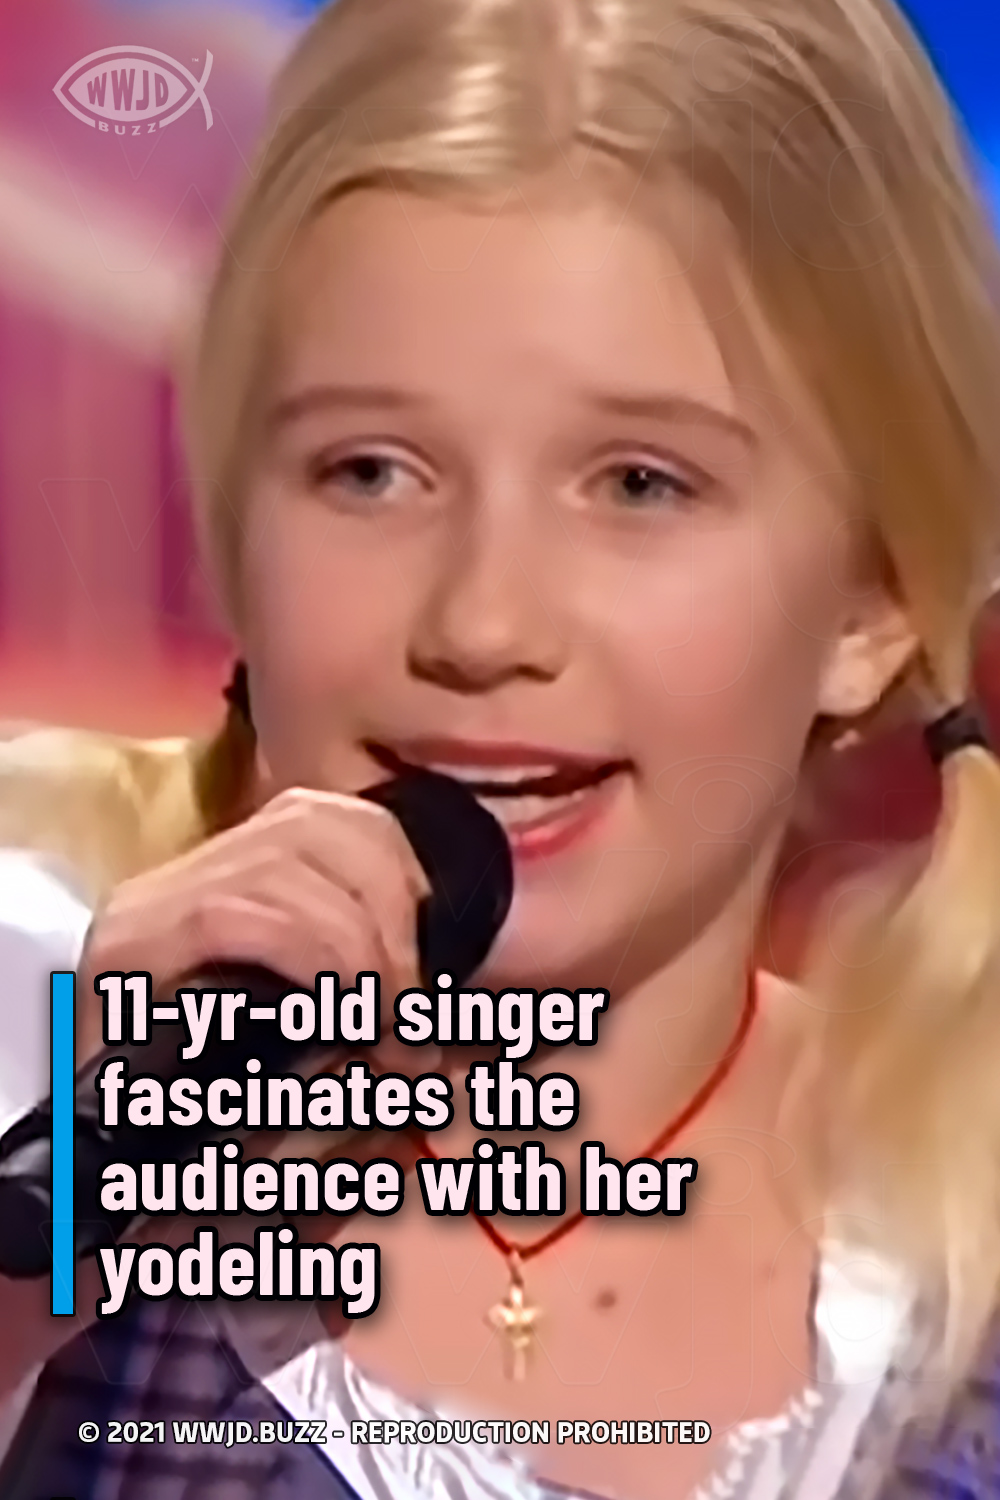 11-yr-old singer fascinates the audience with her yodeling